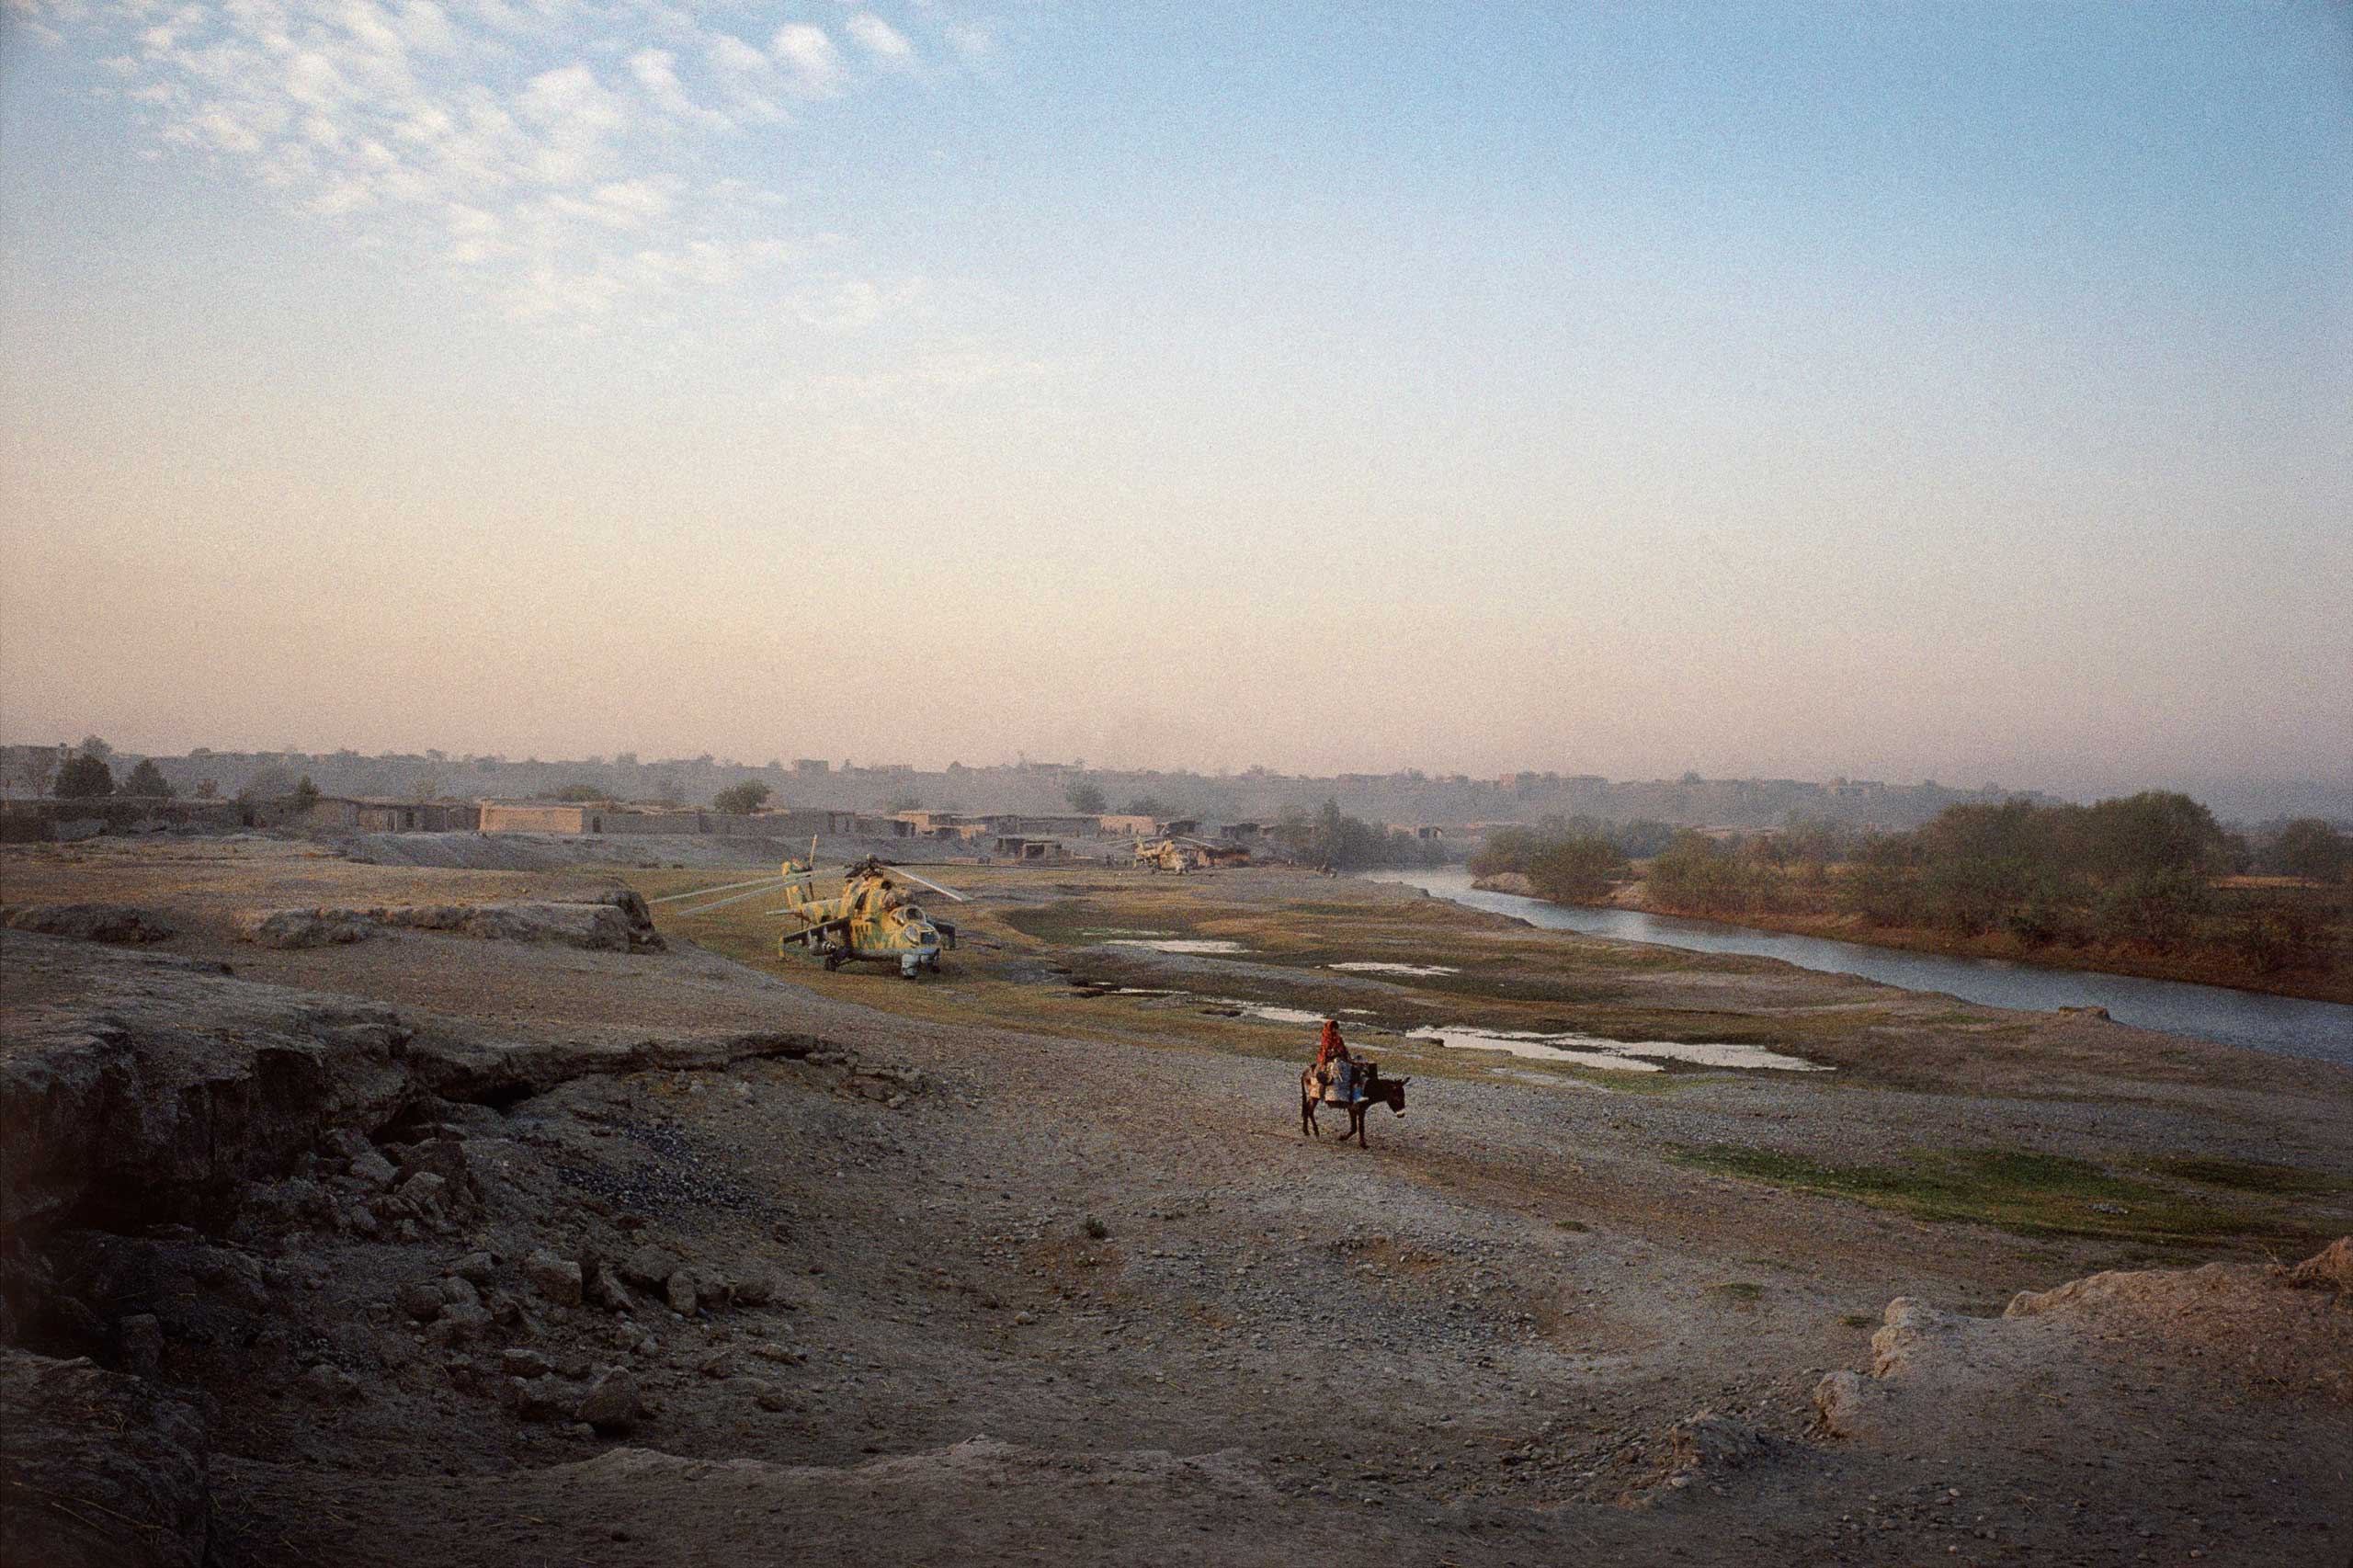 Early morning sunrise in Yangi Qale, Afghanistan. Yangi Qale was one of Massoud's main rebel held areas in northern Afghanistan at this time. 1998.